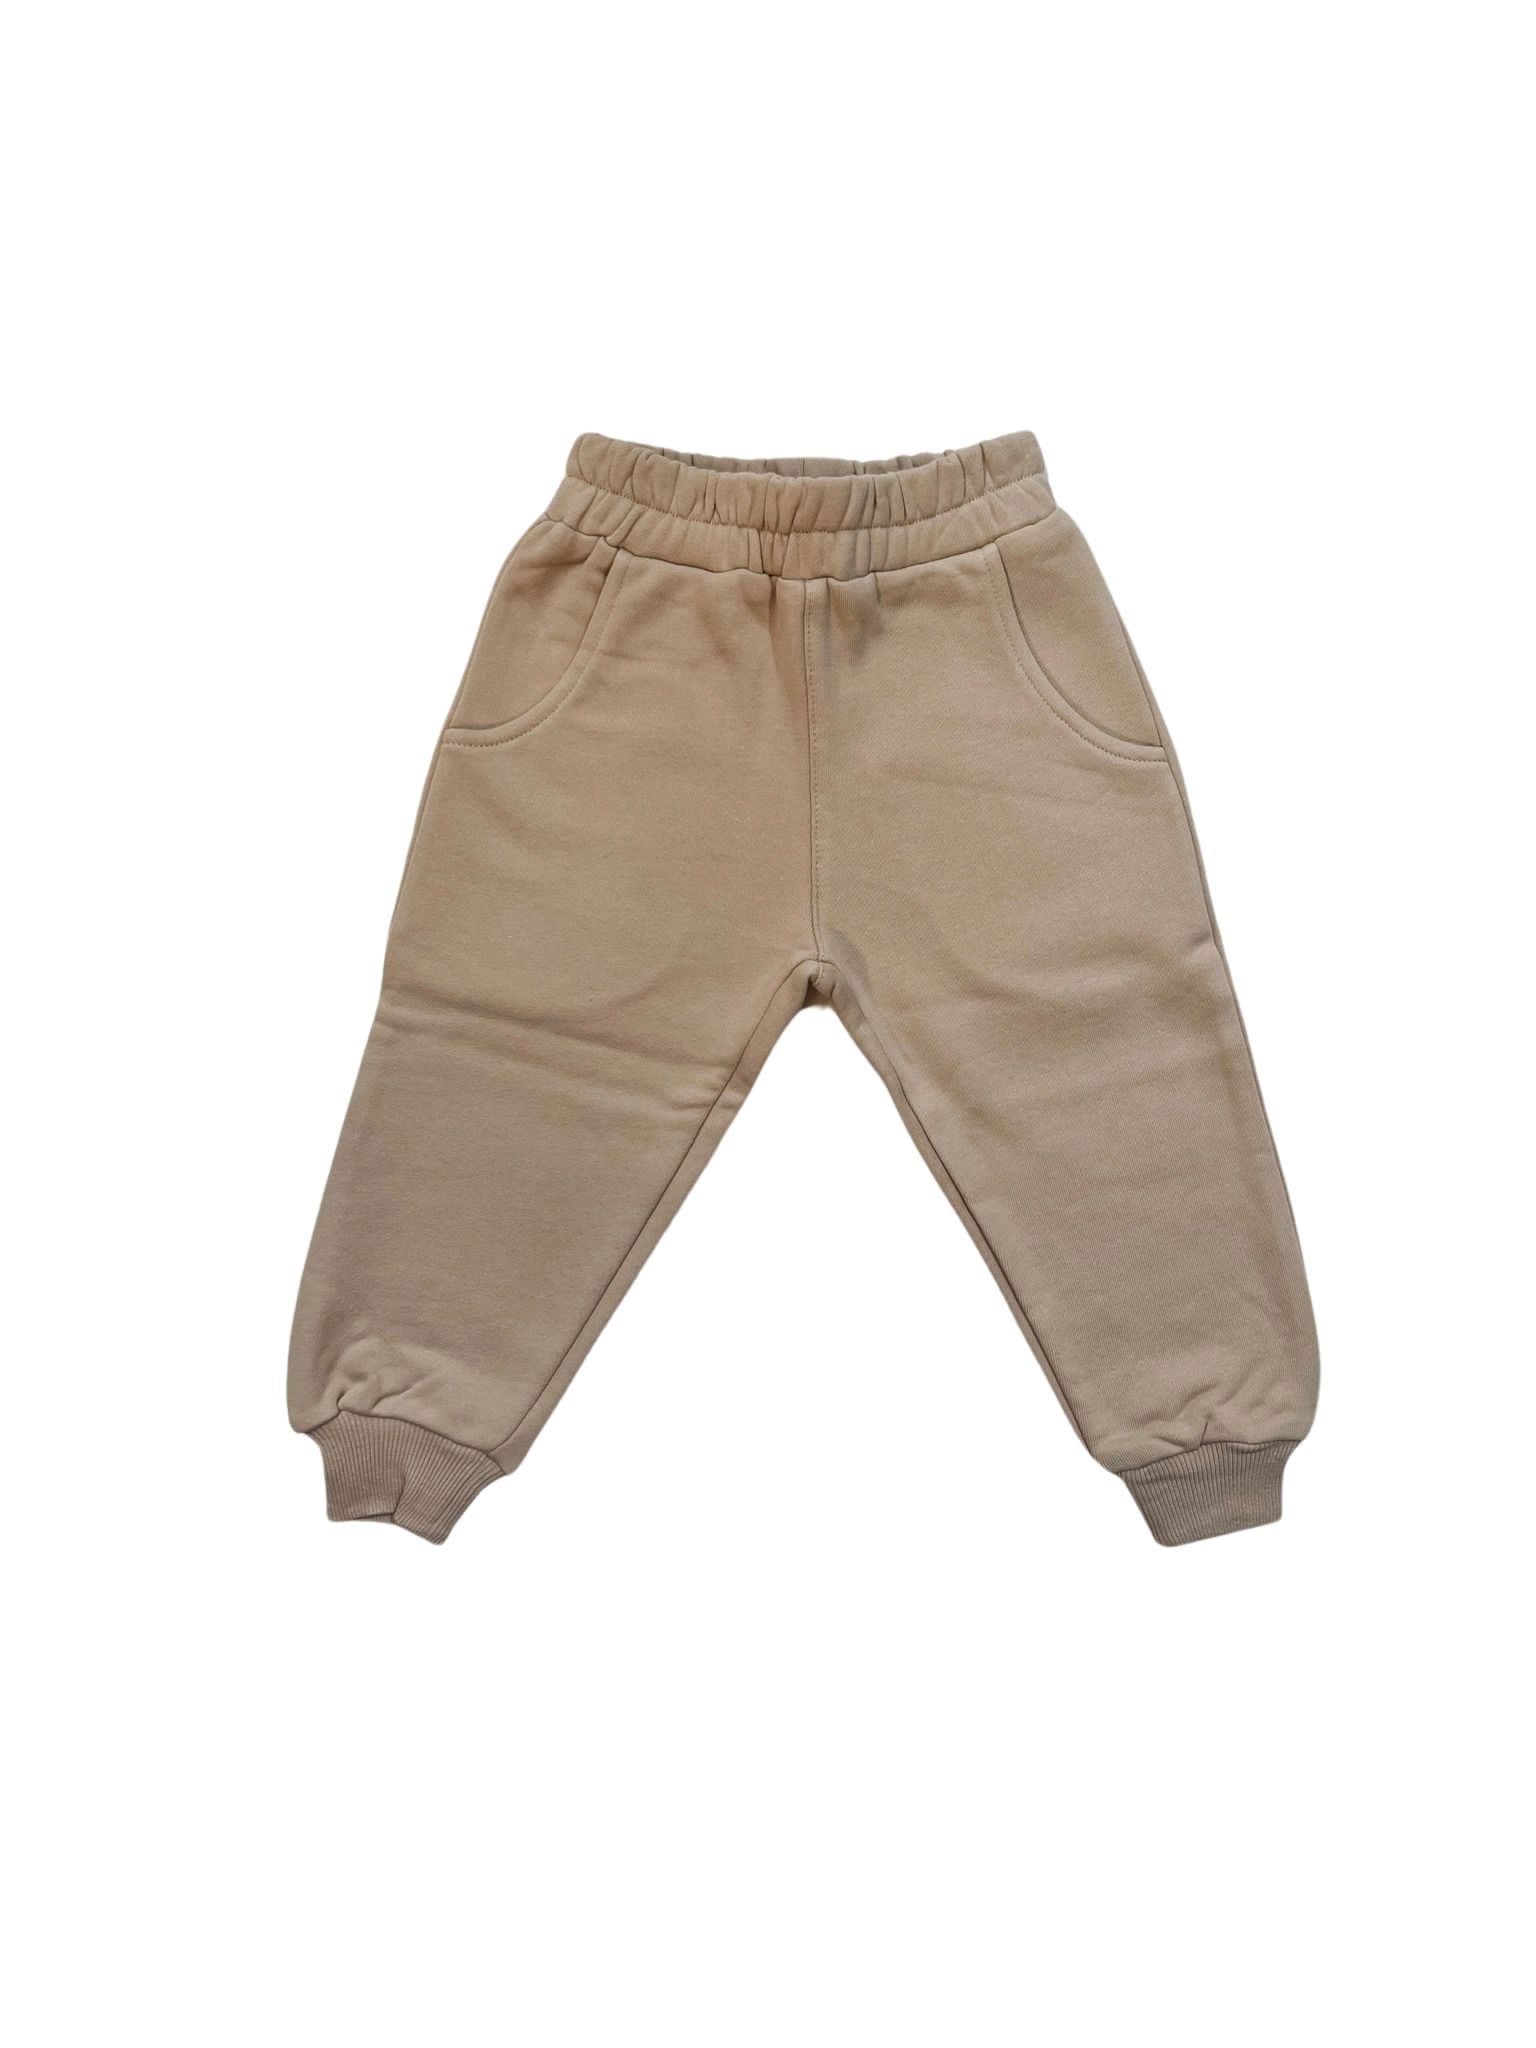 Brown Jogger Pants, KG Lounge Collection